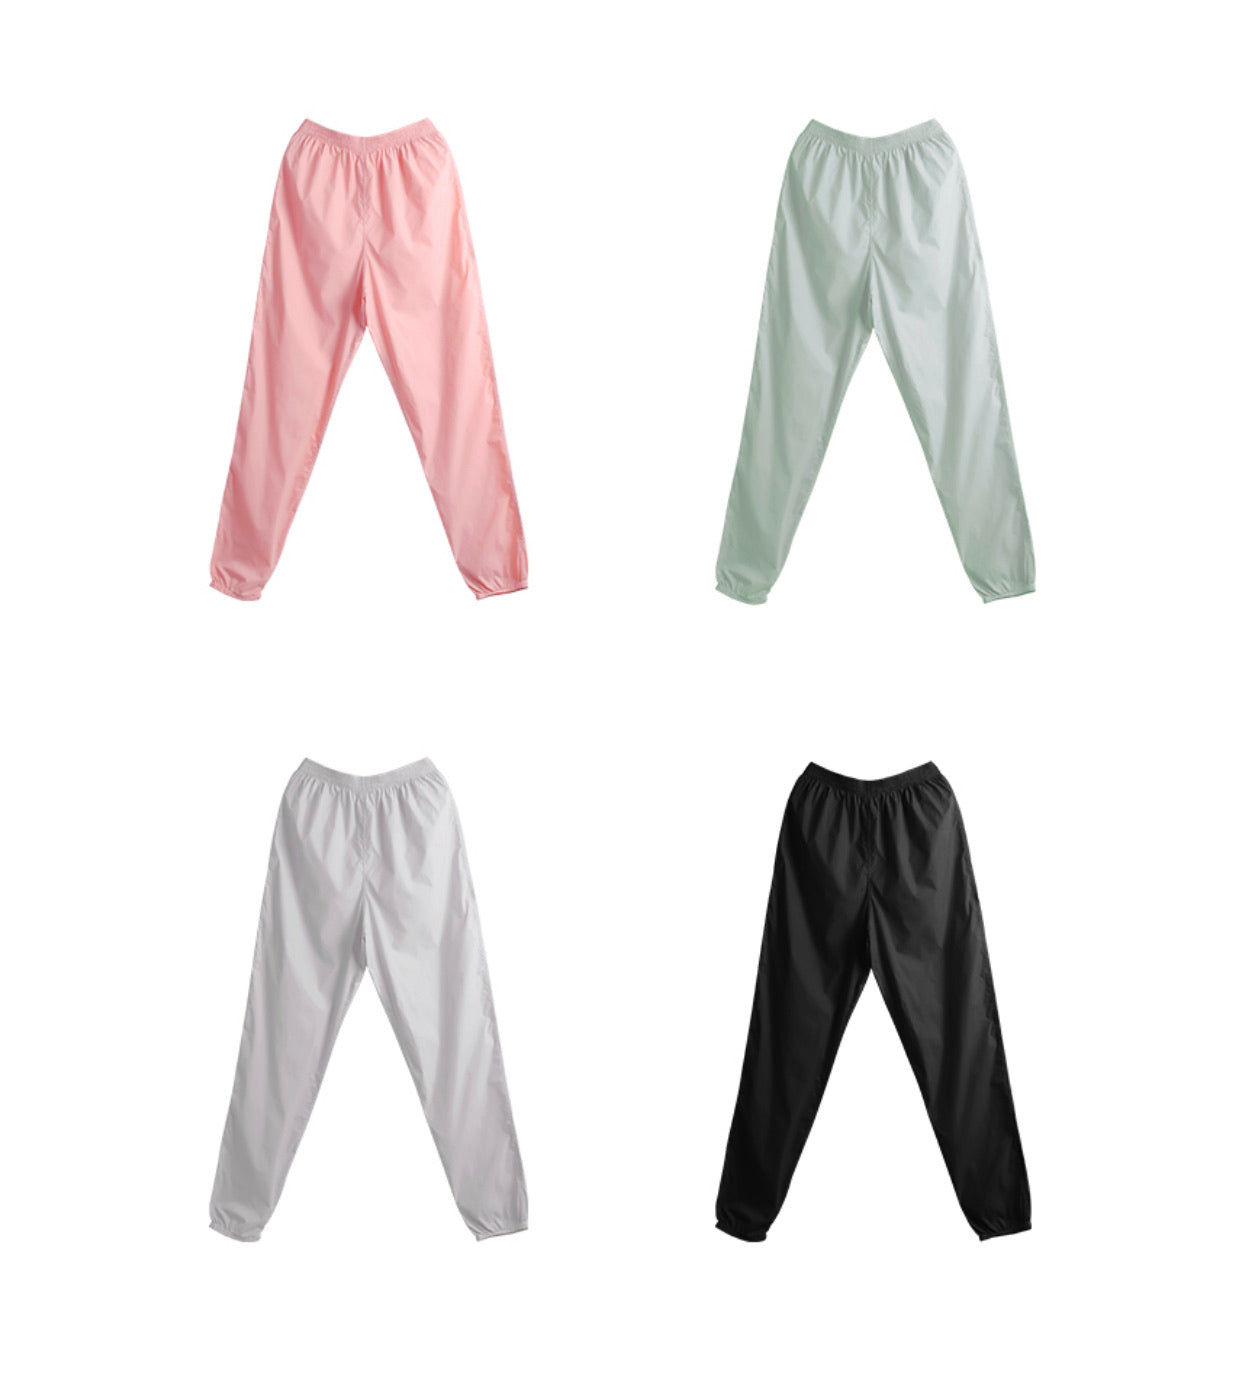 Pistachio Green trash pants / sauna pants / warmup pants for dancers from The Collective Dancewear also avaiable in pink, light grey and black